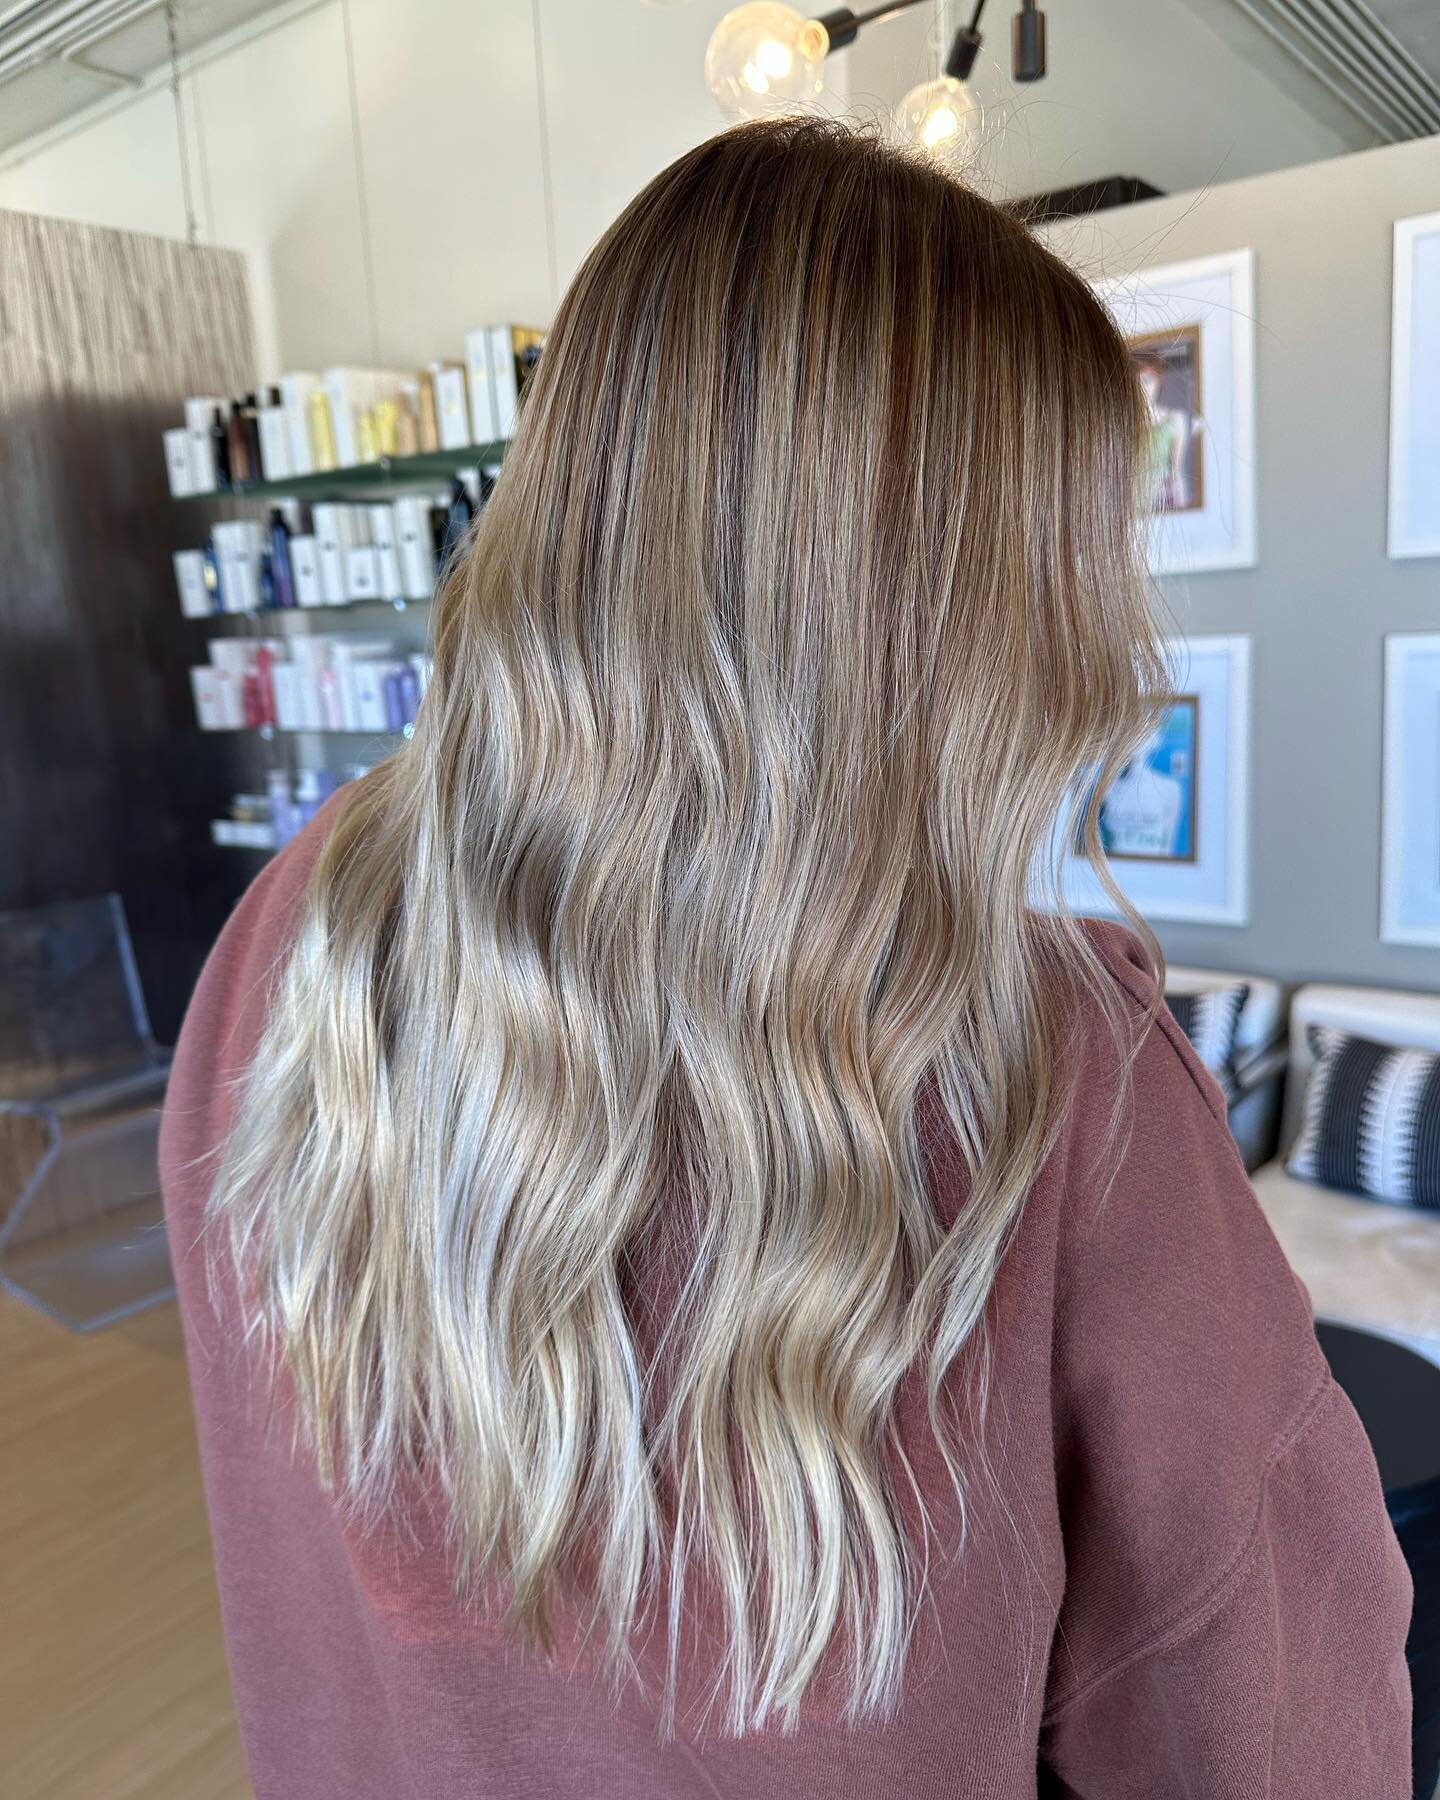 Summer blonde 
&bull;
&bull;
Done by our stylist @jessicahoover33 
#babylights #highlights 
#balayage #balayagehighlights #balayagehair #balayagedandpainted #dimensionalbalayage #dimensionalcolor #dimensionalblonde #blondebalayage #blondes #Blondesha